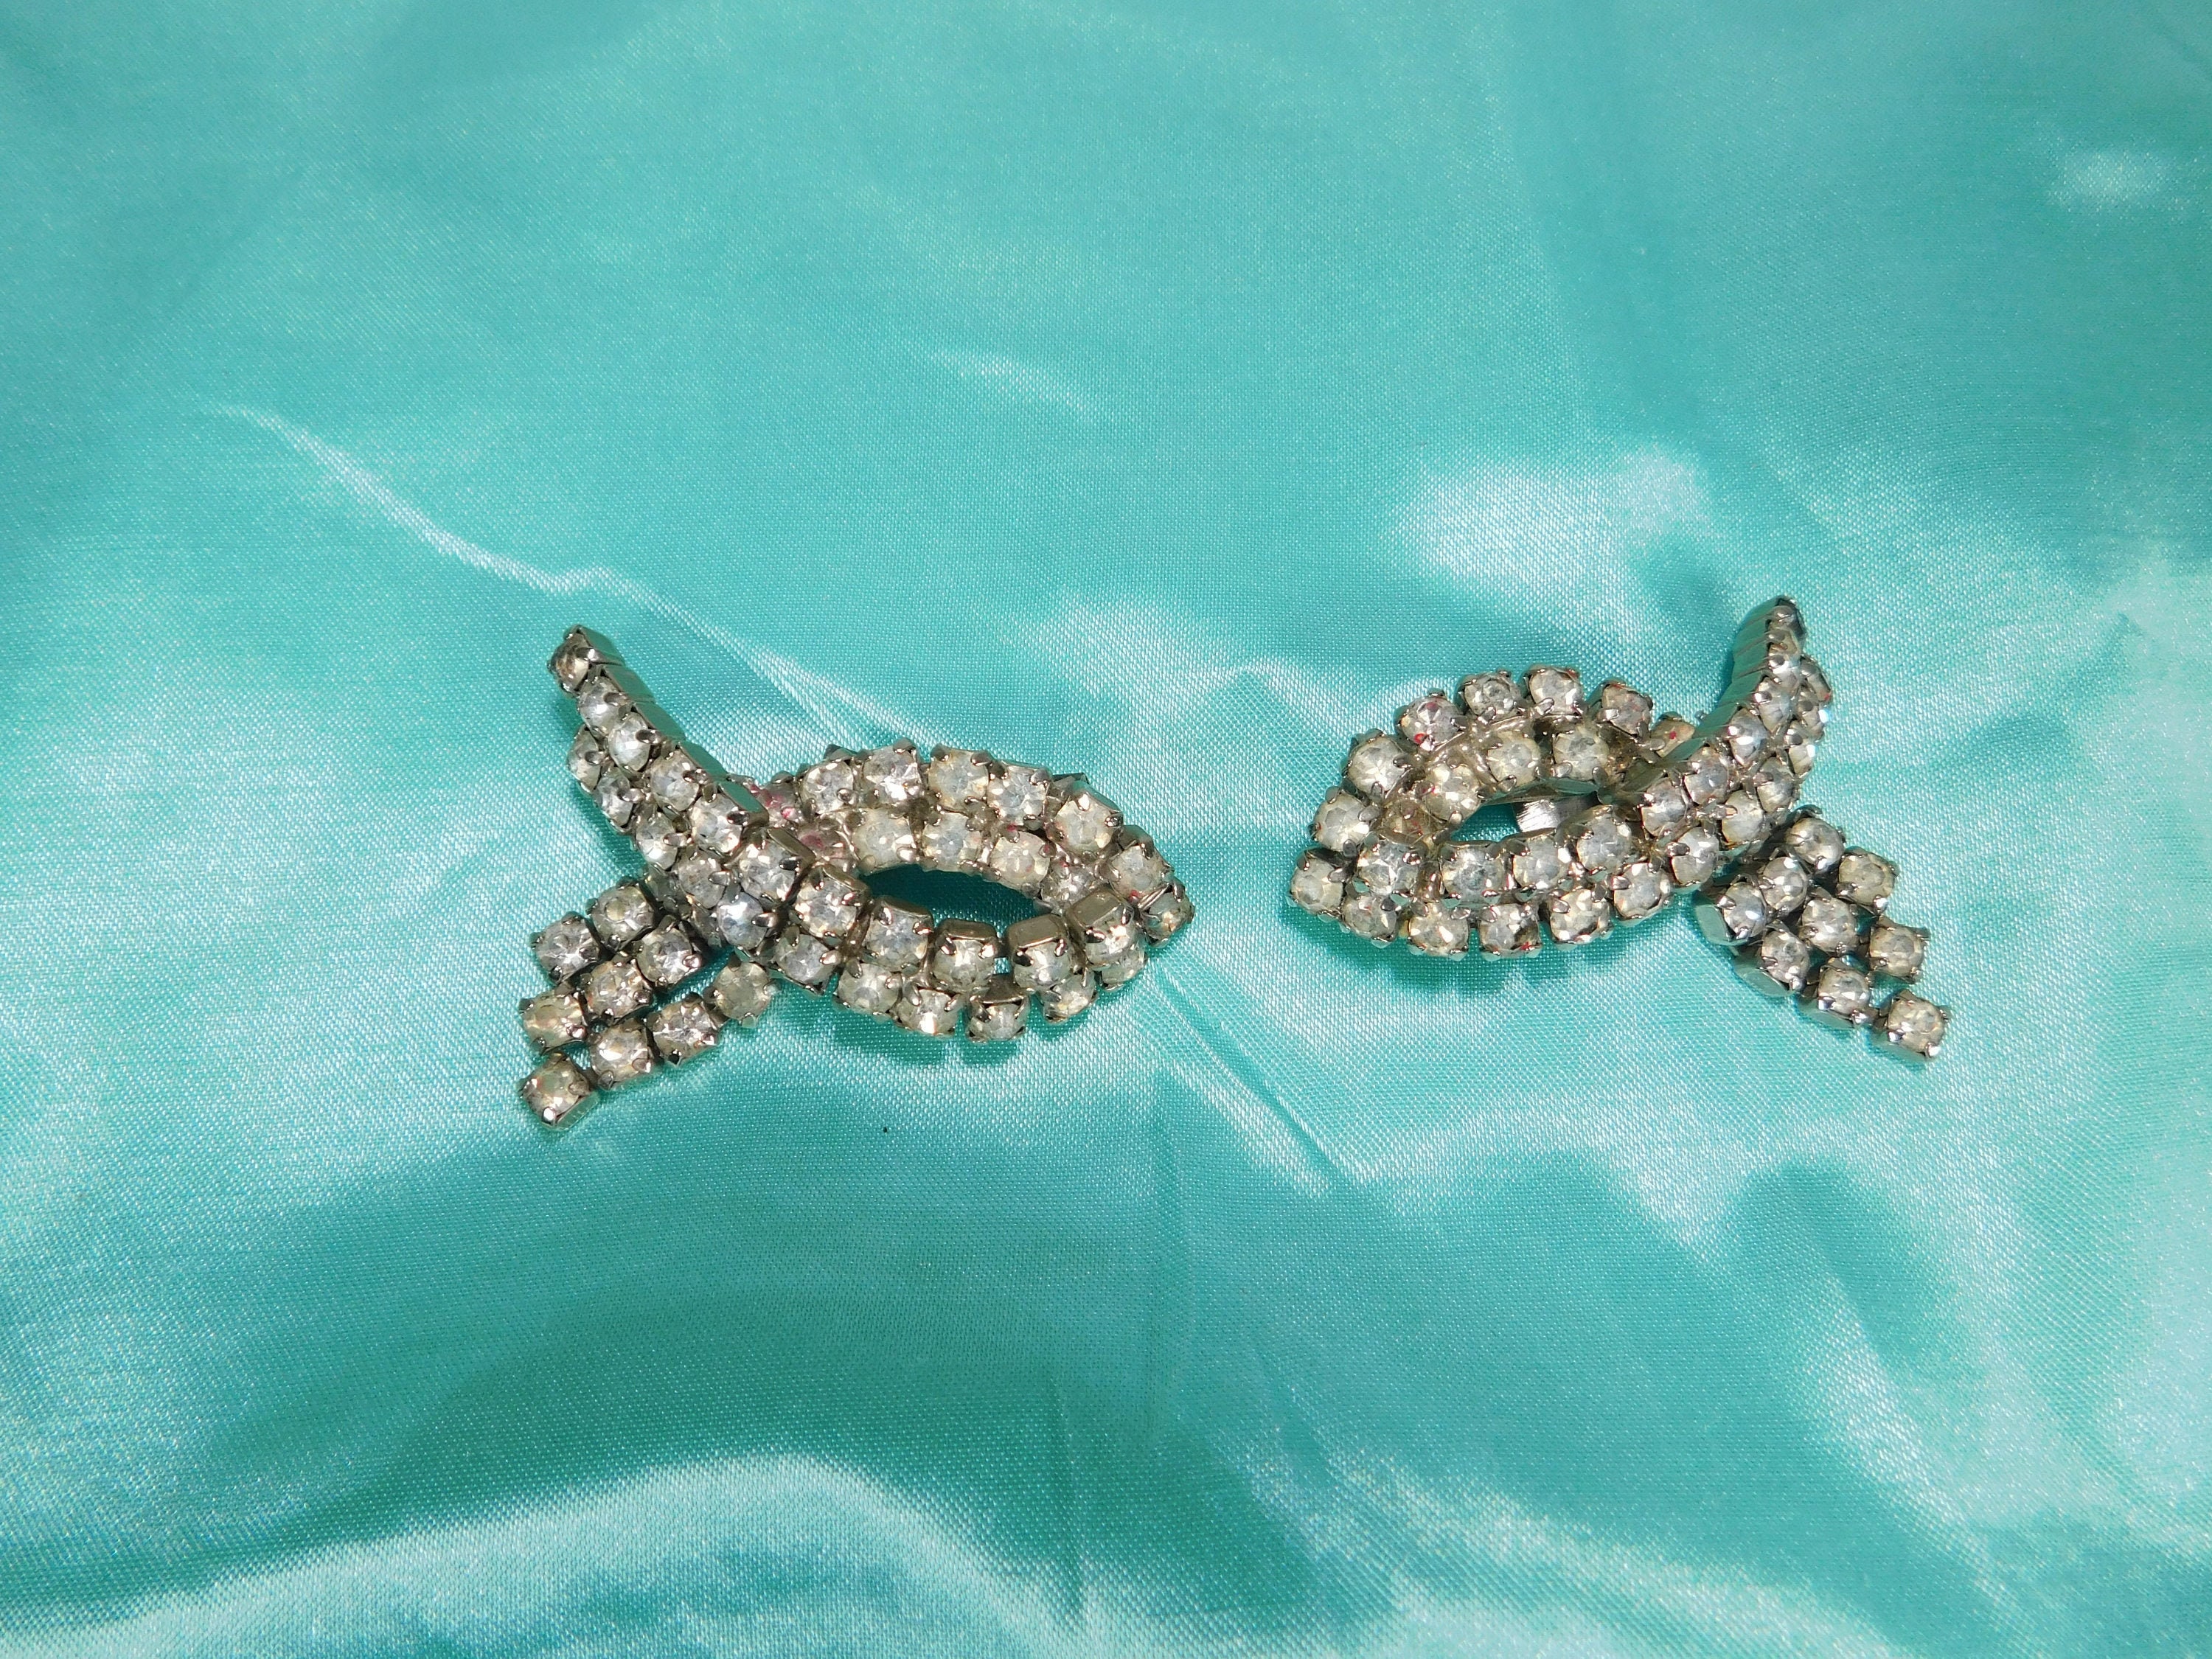 Vintage Rhinestone Shoe Clips by Musi – The Jewelry Lady's Store